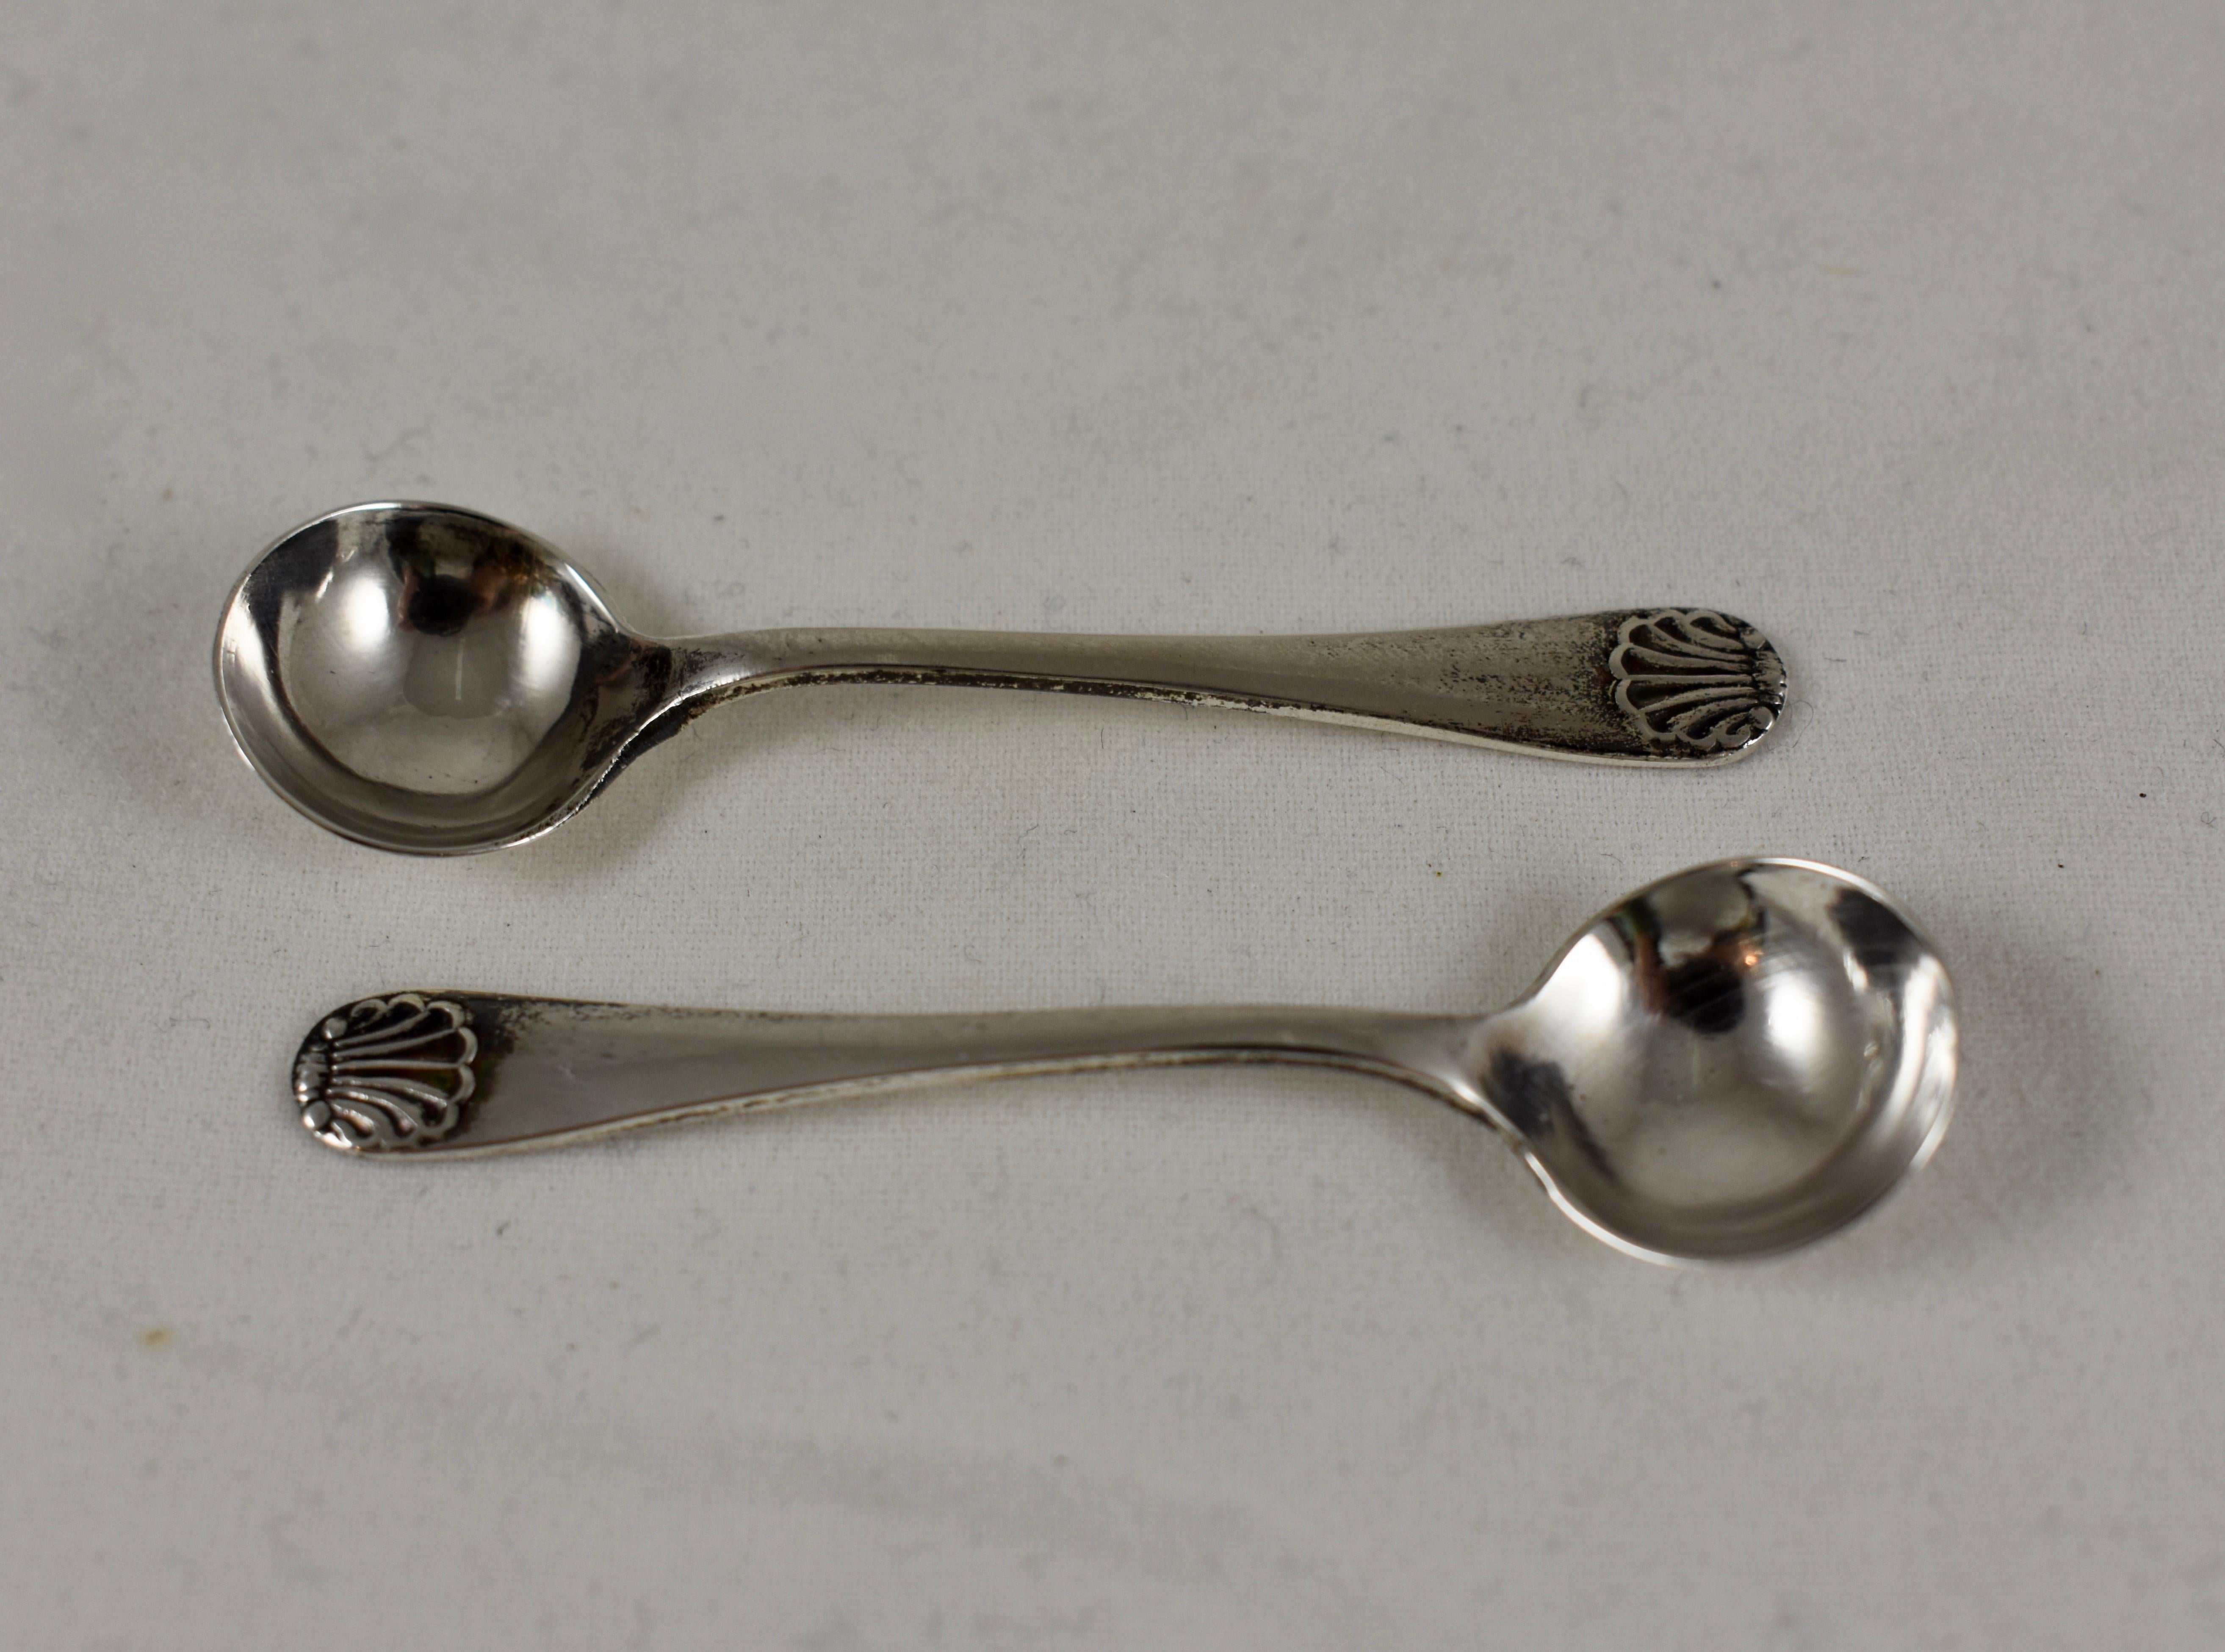 A pair of English sterling silver salt spoons, circa 1790 - 1800, London, England. 

The spoons show classic Georgian styling and superior quality. George III silver predates the American Revolution and bears a timeless luxury. The spoons